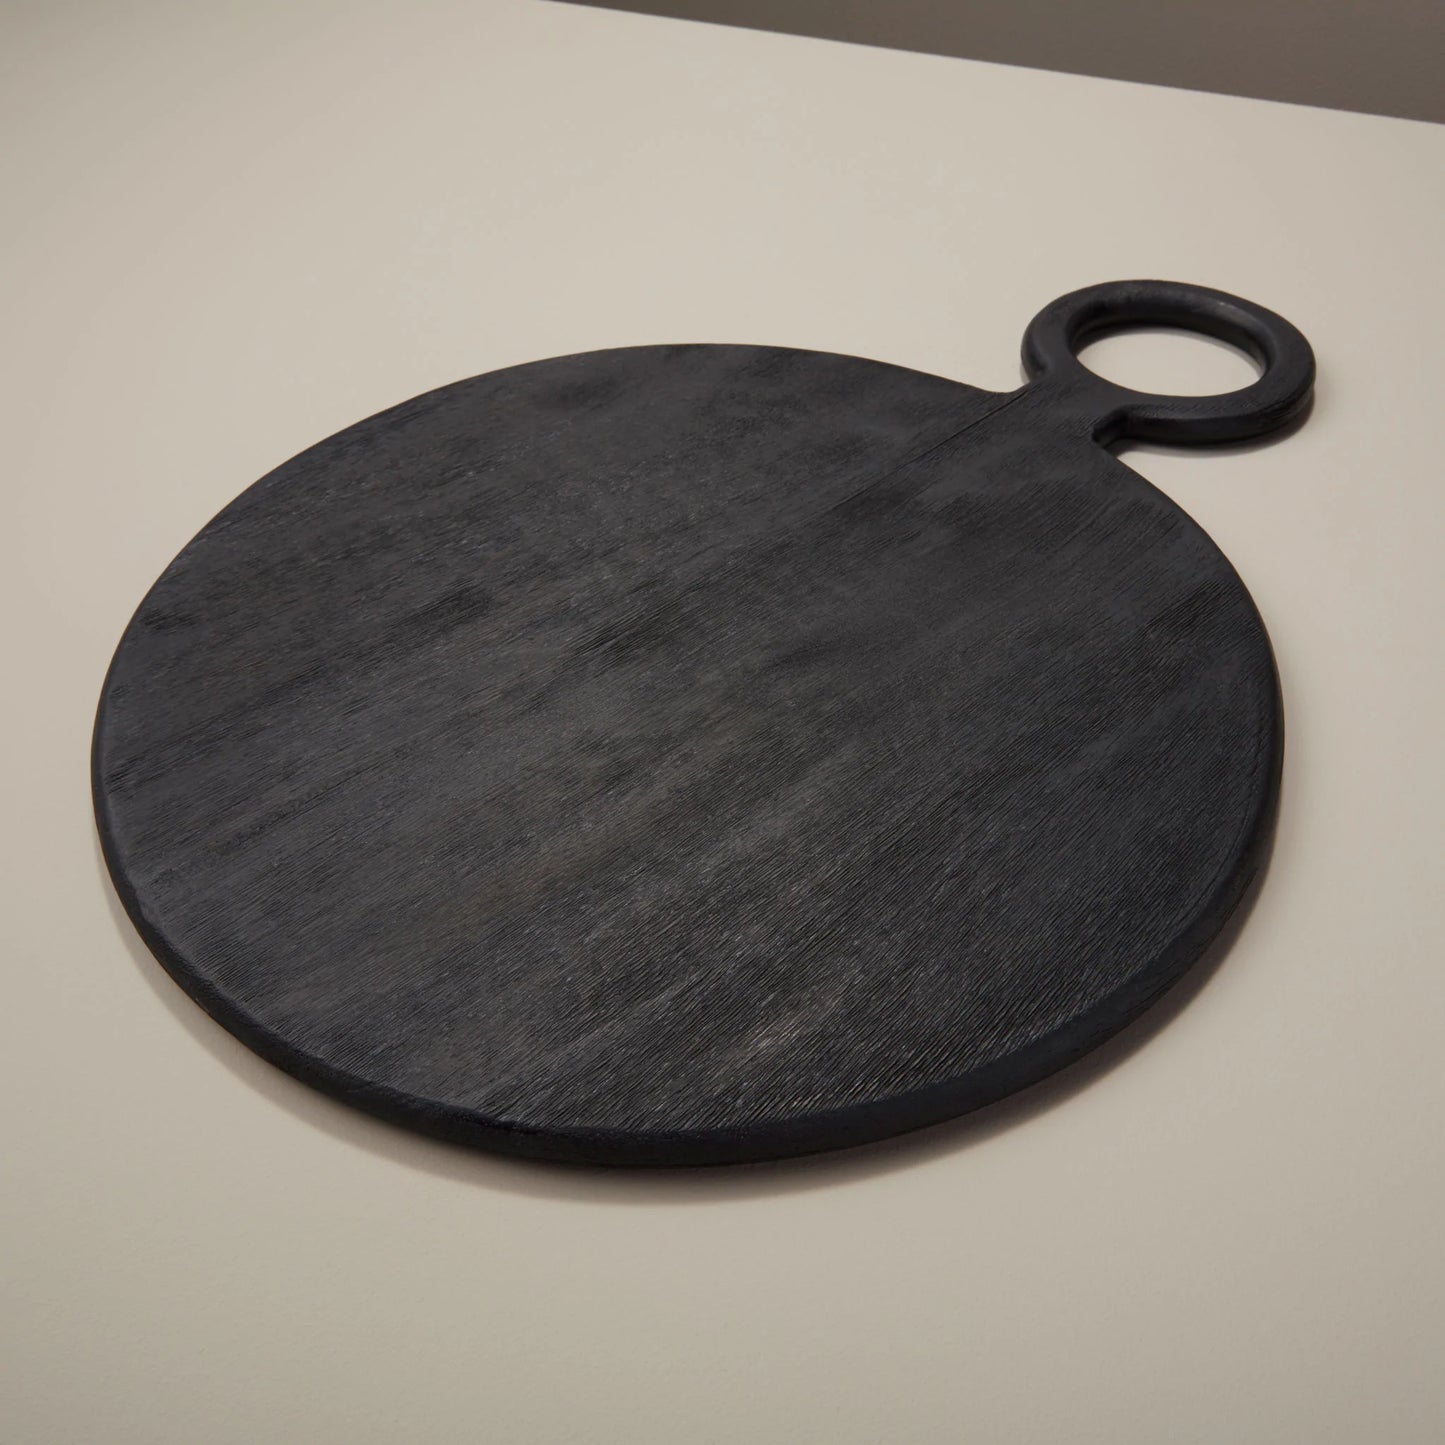 The Myla Black Mango Board - An elegant and versatile The Myla Black Mango Board from GRACE BLU SHOPPE, perfect for serving or as a decorative accent.